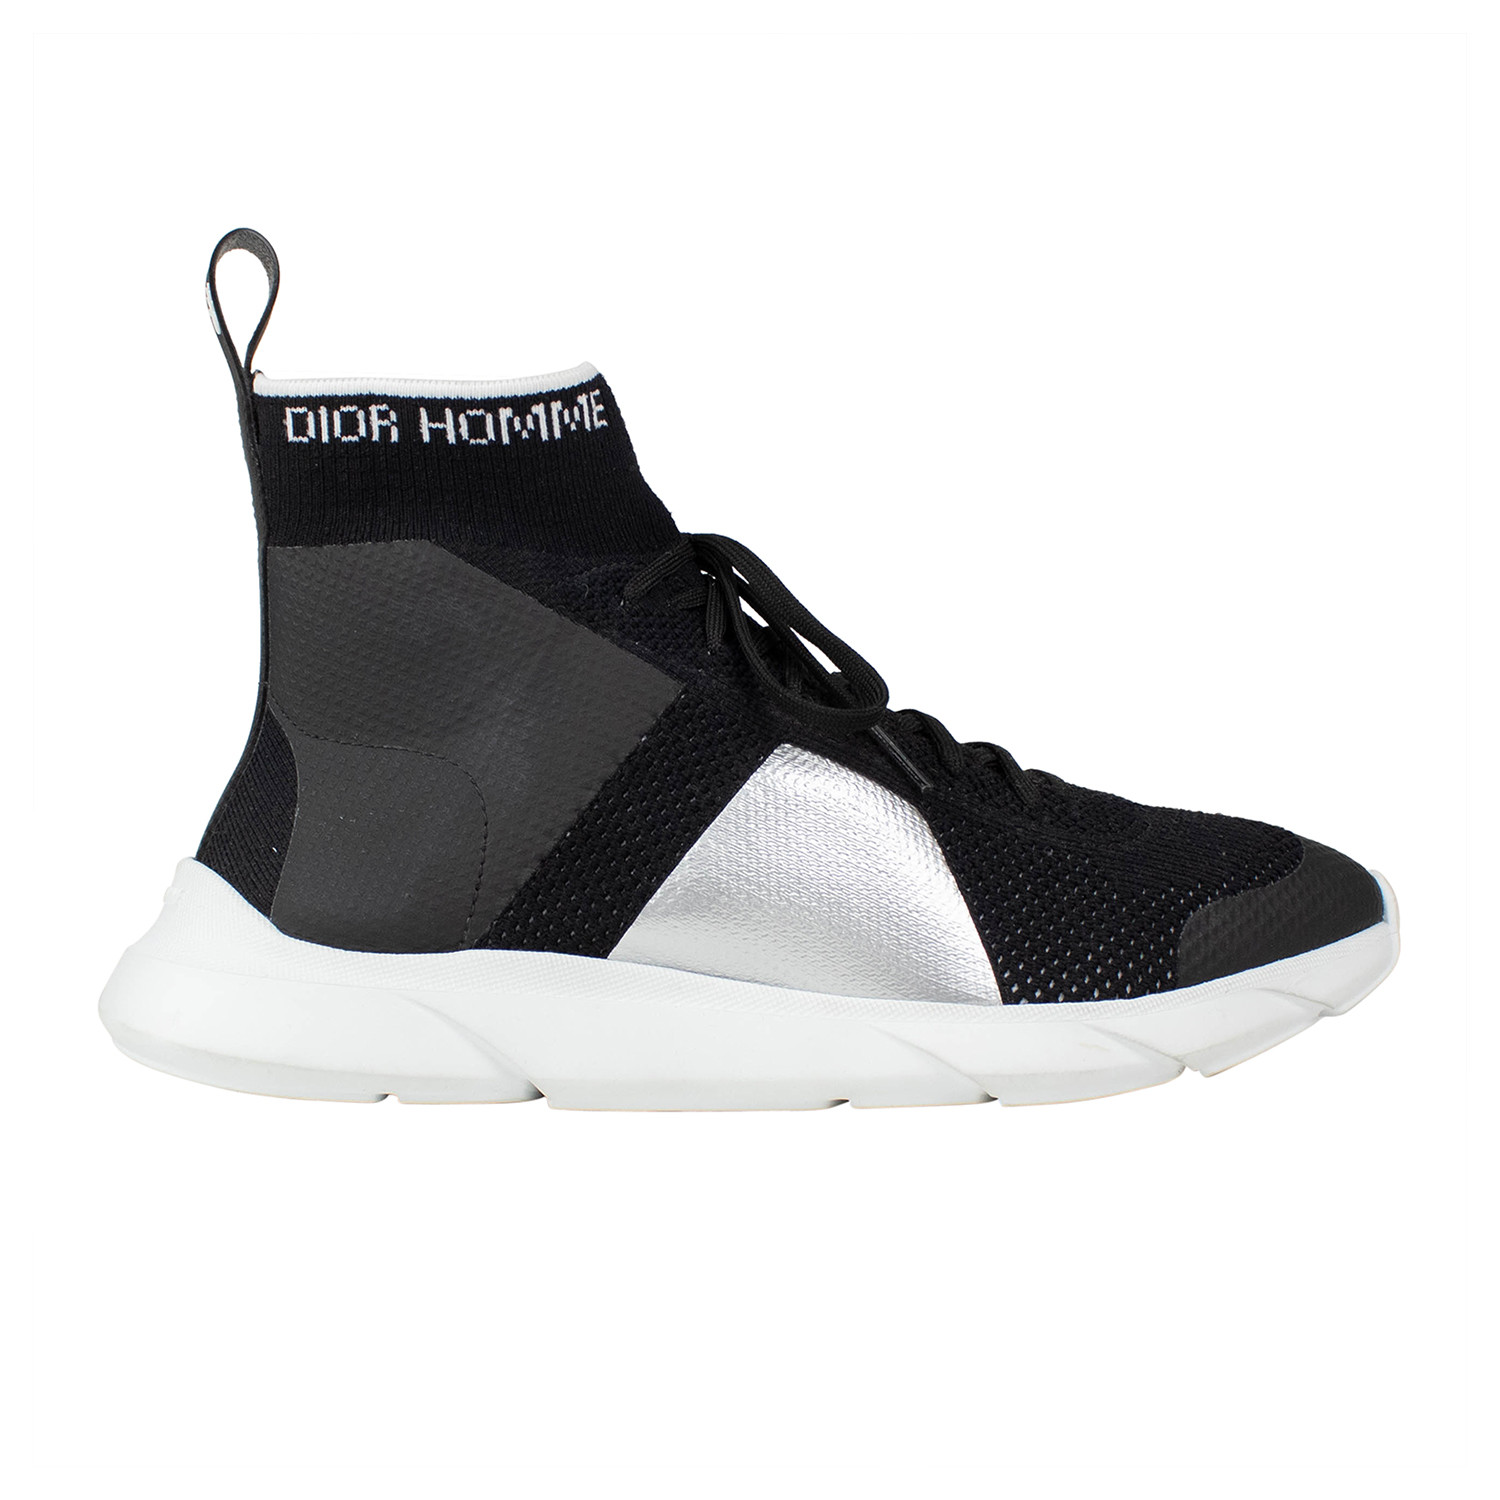 Dior Homme Reveal BMX Colab and Ultra-Limited Sneakers - Sneaker